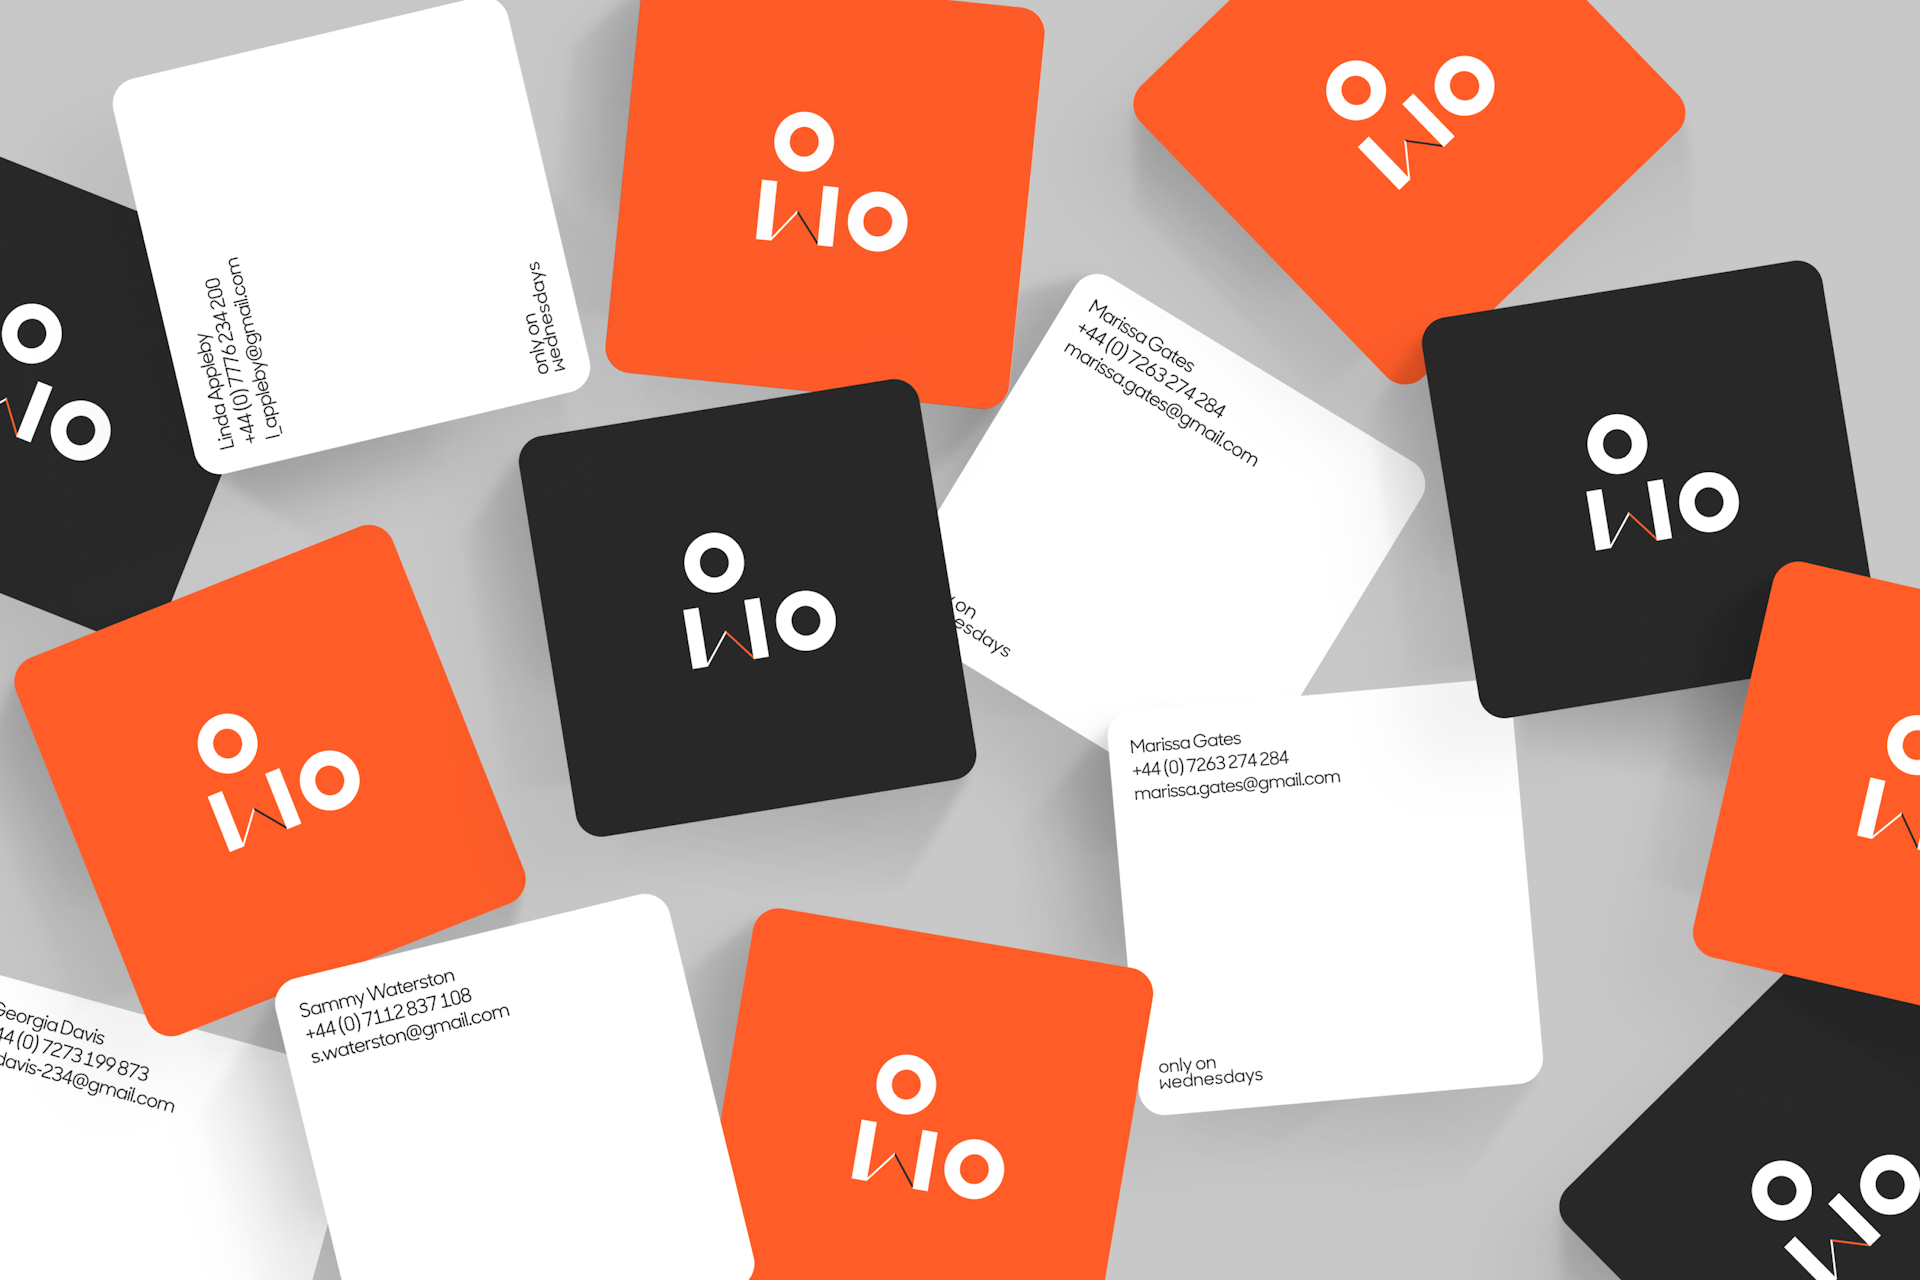 Only on Wednesdays branded business cards in black, white and orange arranged on a table